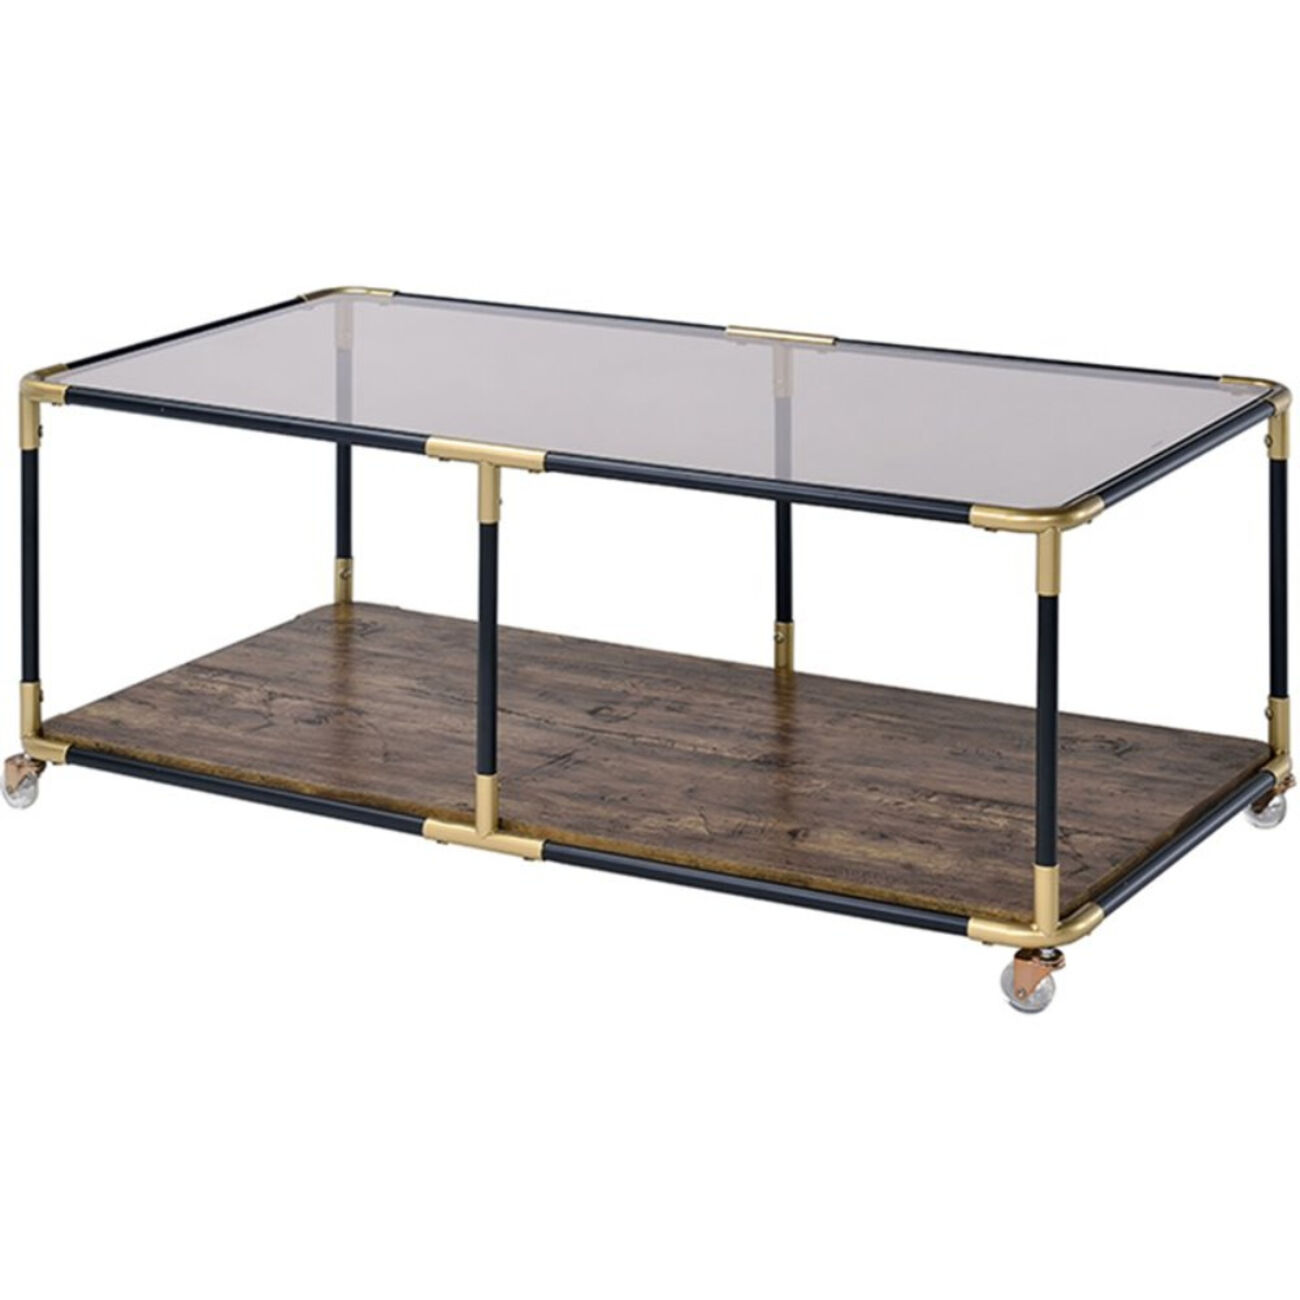 Metal Frame Coffee Table with Glass Top and Wooden Bottom Shelf, Multicolor